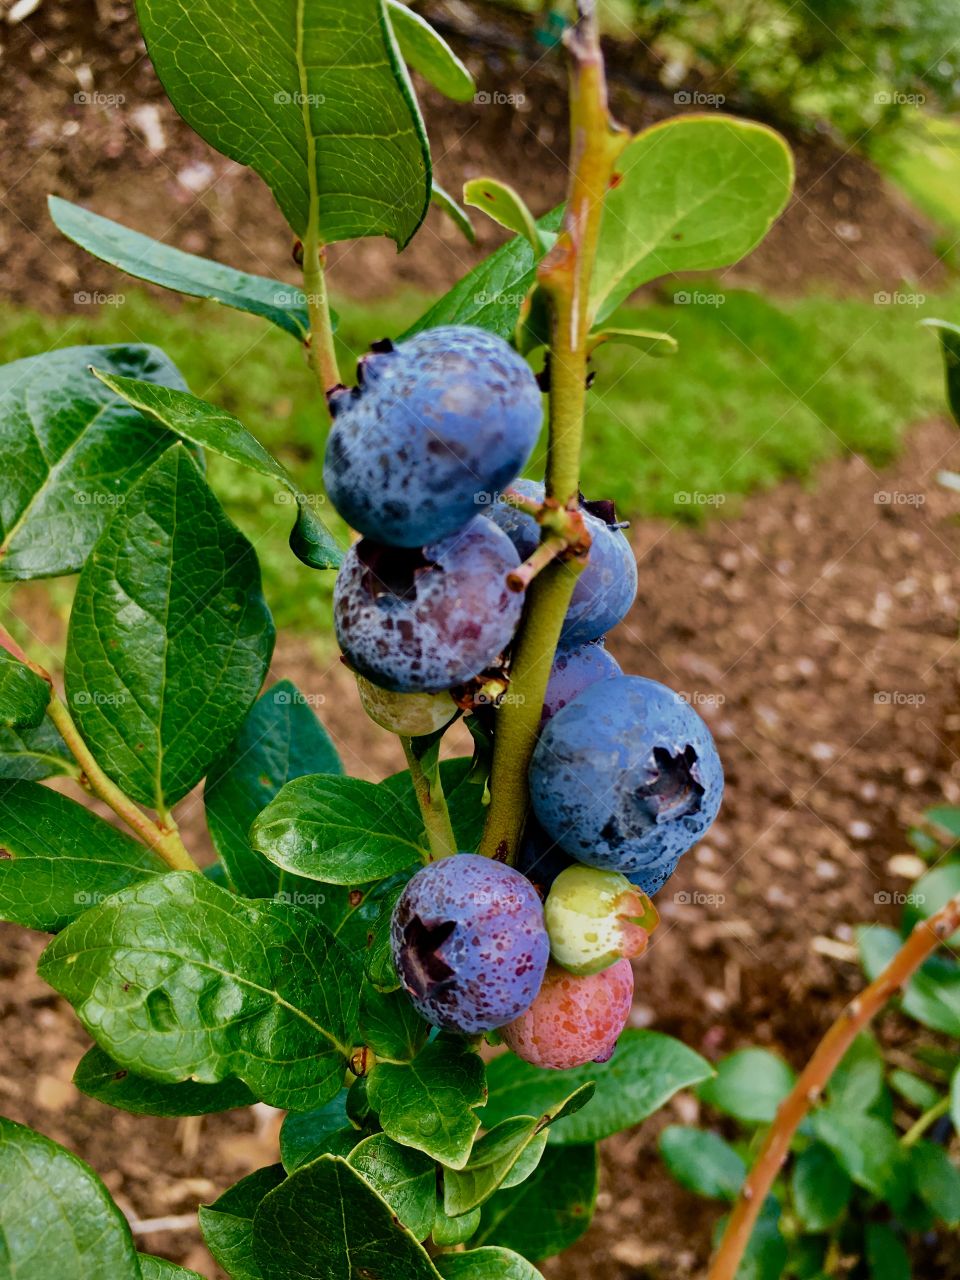 A mix of ripe and unripe blueberries on a branch 